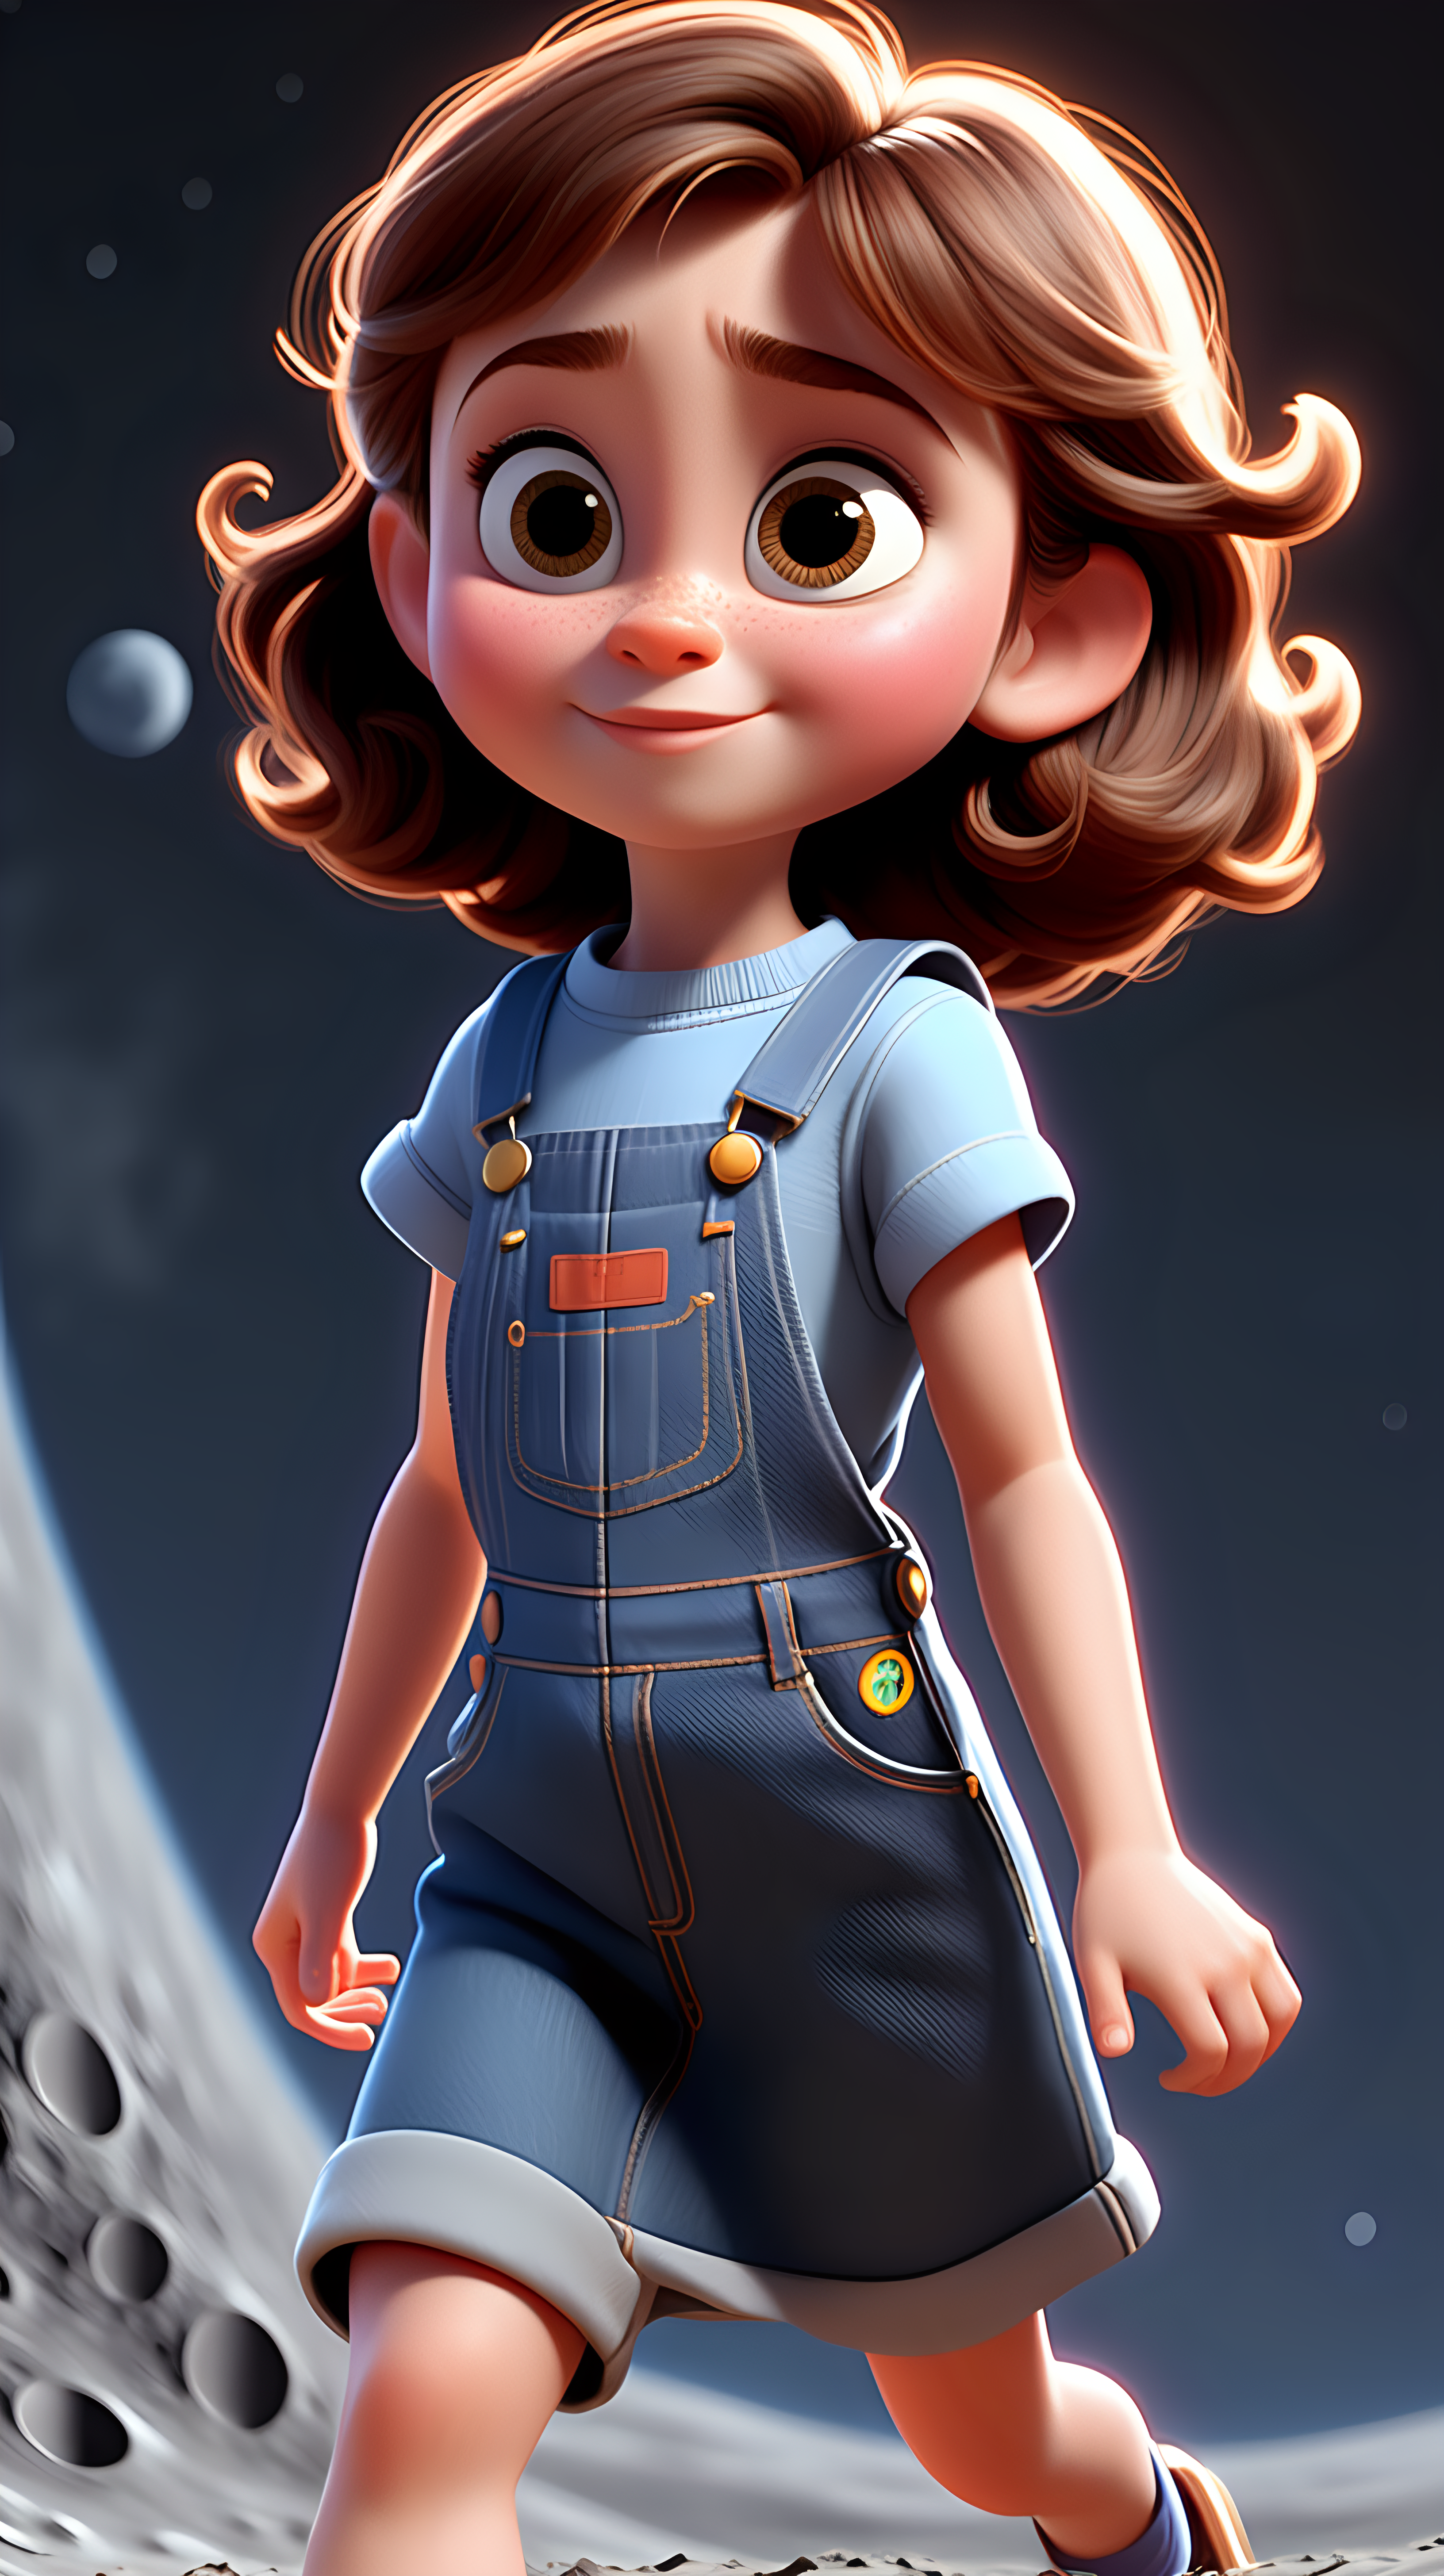 imagine 5 year old short girl with brown hair, fair skin, hazel eyes, wearing a denim dress overall, use Pixar style animation, make her running and make it full body size, standing on the surface of the moon